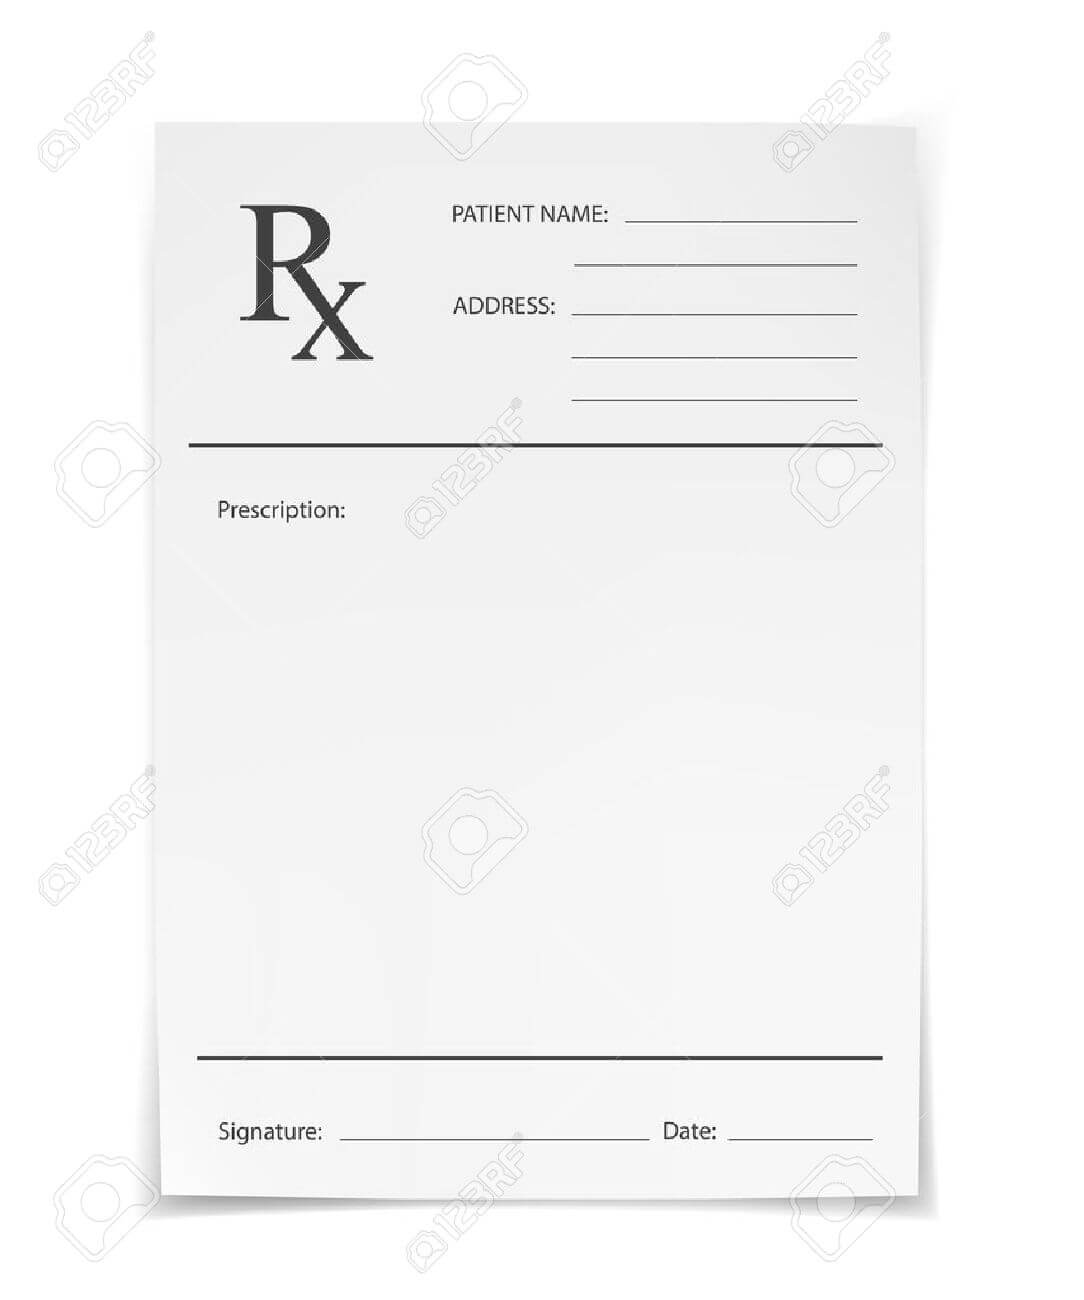 Blank Rx Prescription Form Isolated On White Background Intended For Blank Prescription Form Template